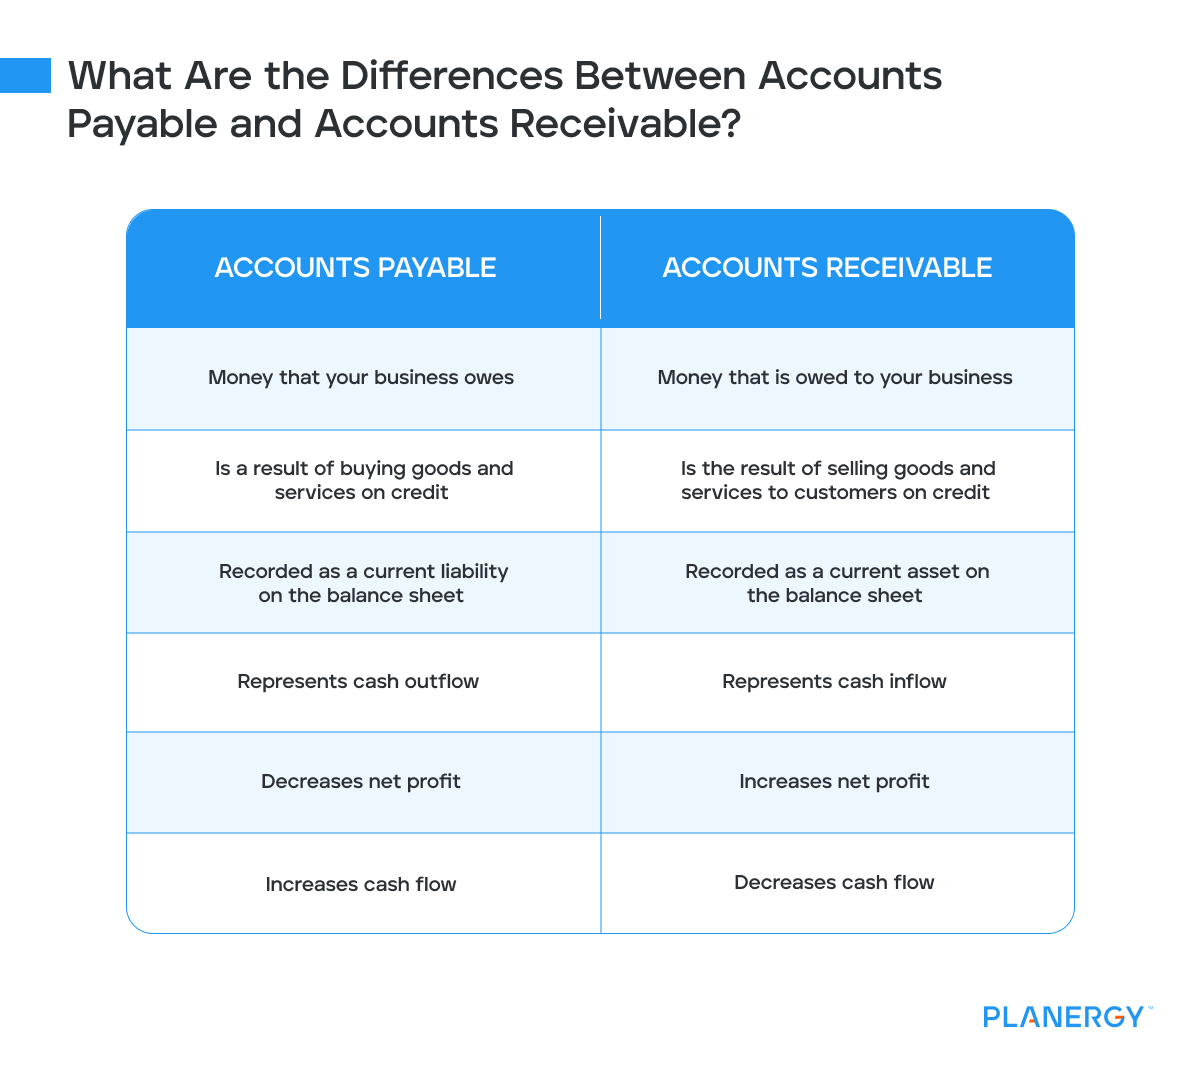 What are the differences between accounts payable and accounts receivable